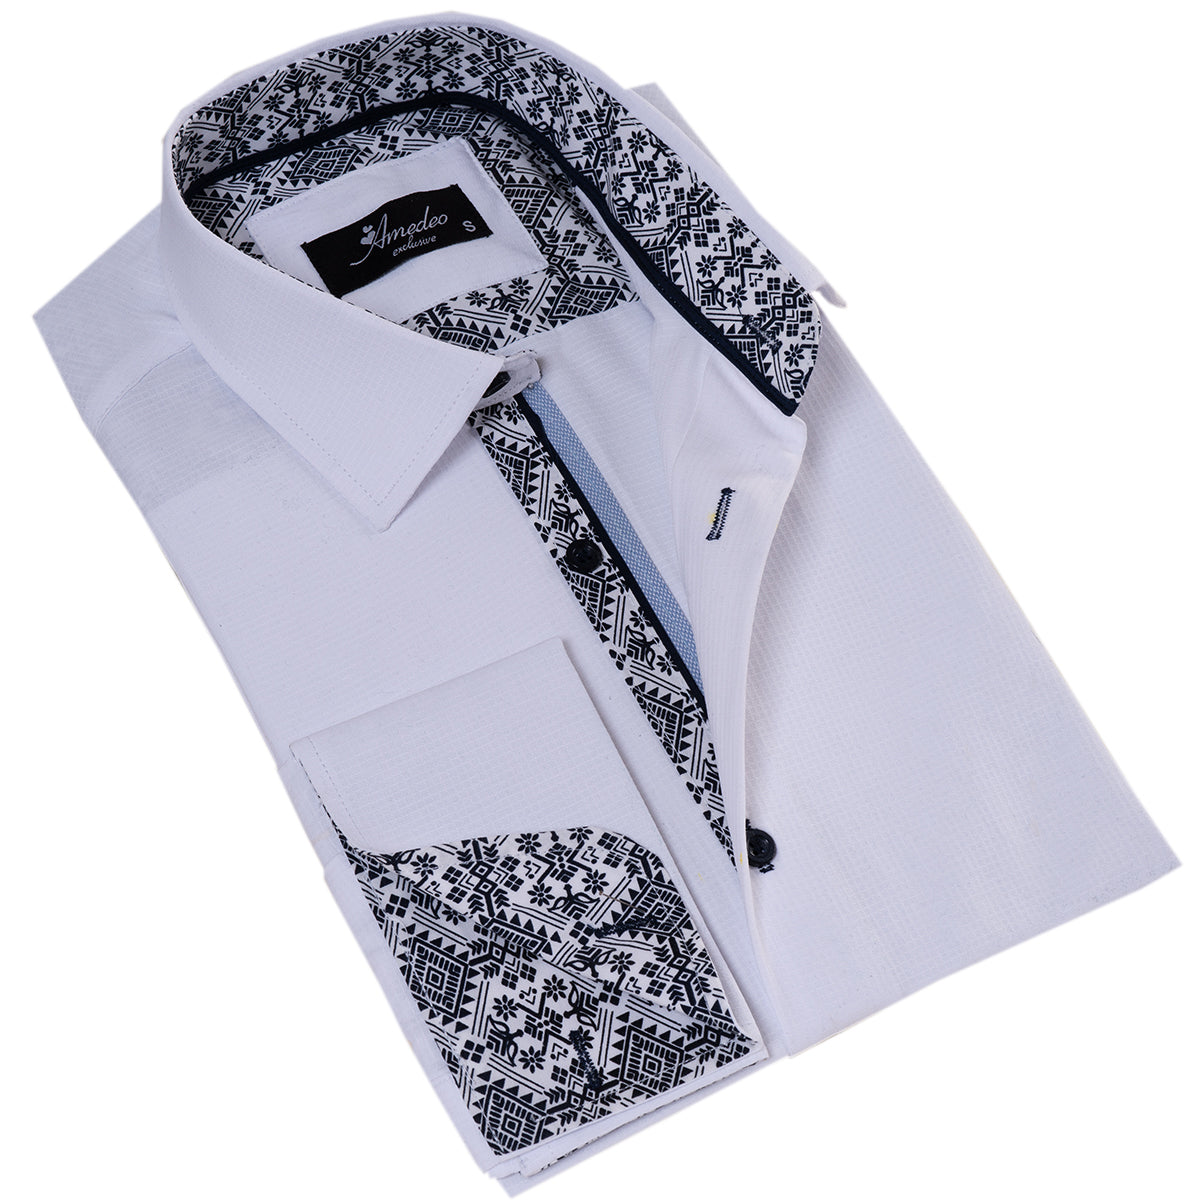 Wanorde Geven Trots White inside Black Printed Double Cuff Men's Slim Fit Designer French Cuff  Shirt – Amedeo Exclusive